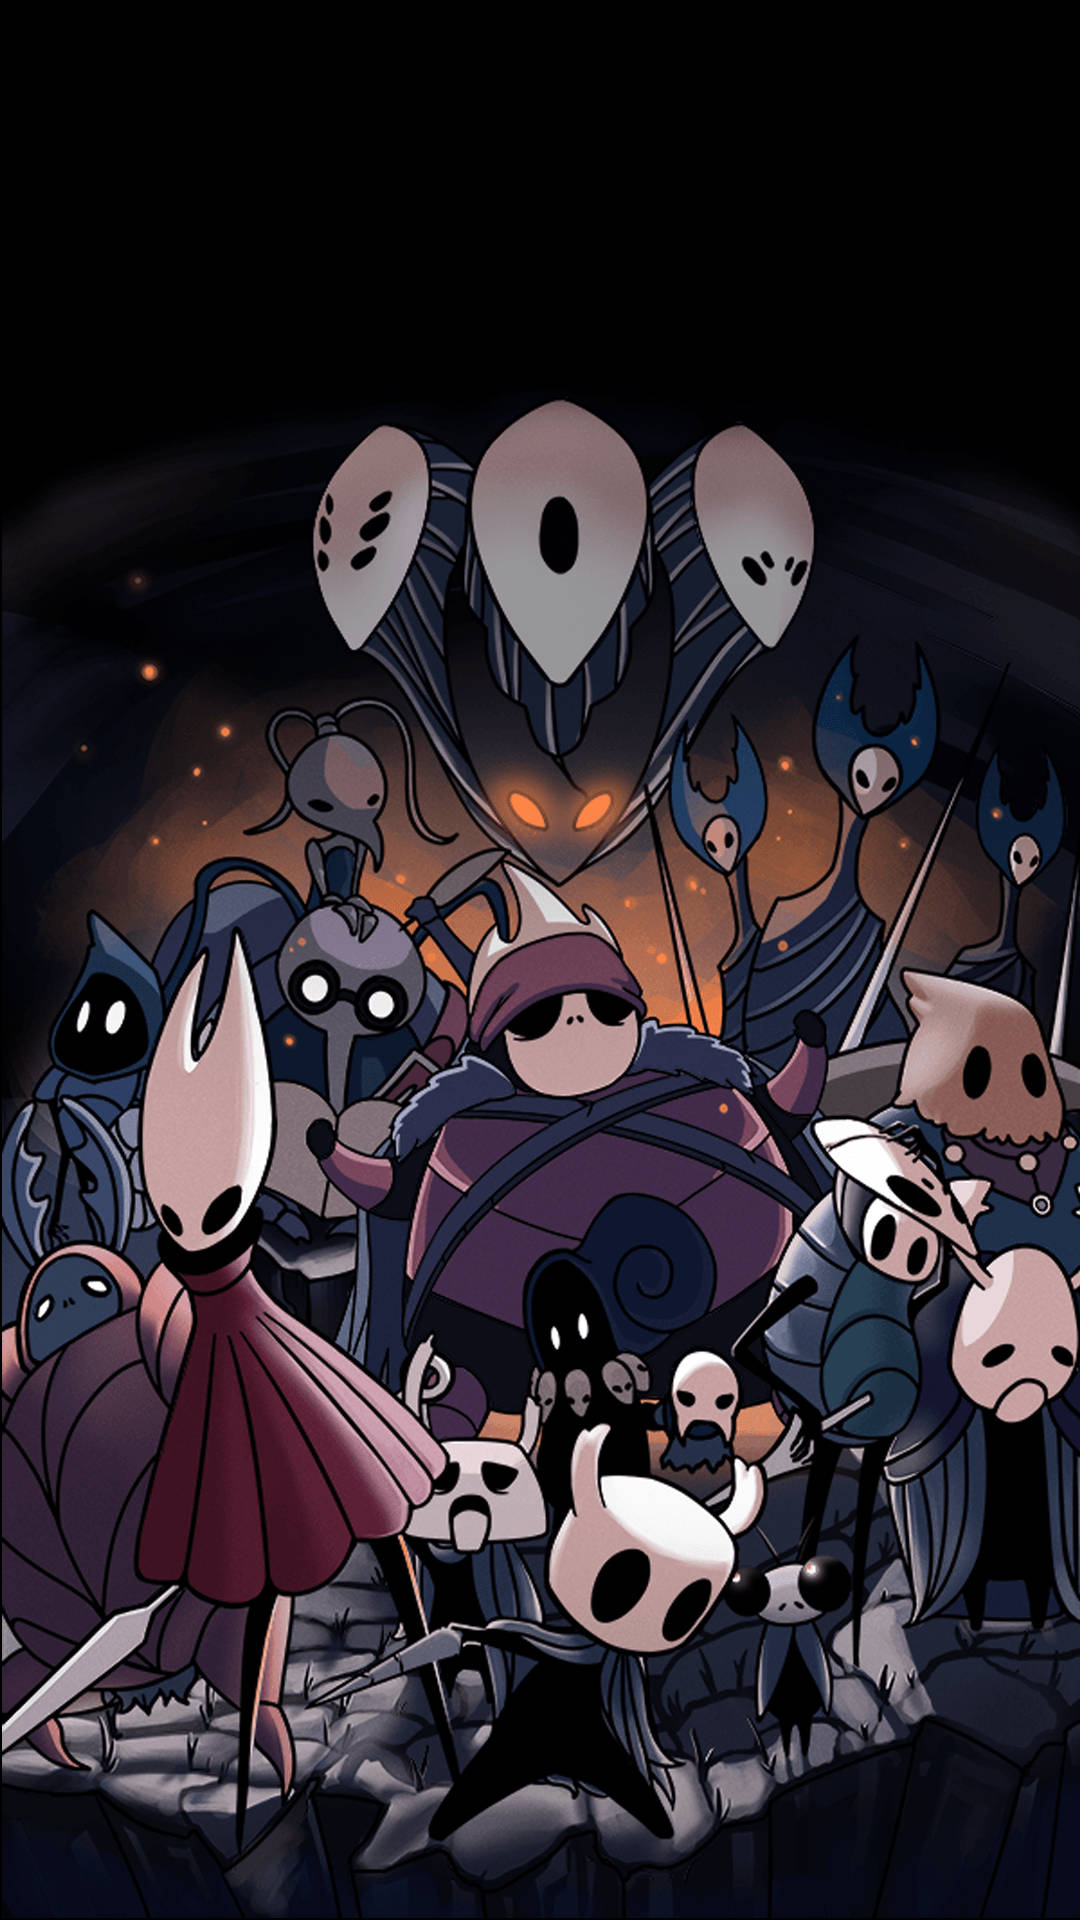 Cool Hd Characters Of Hollow Knight